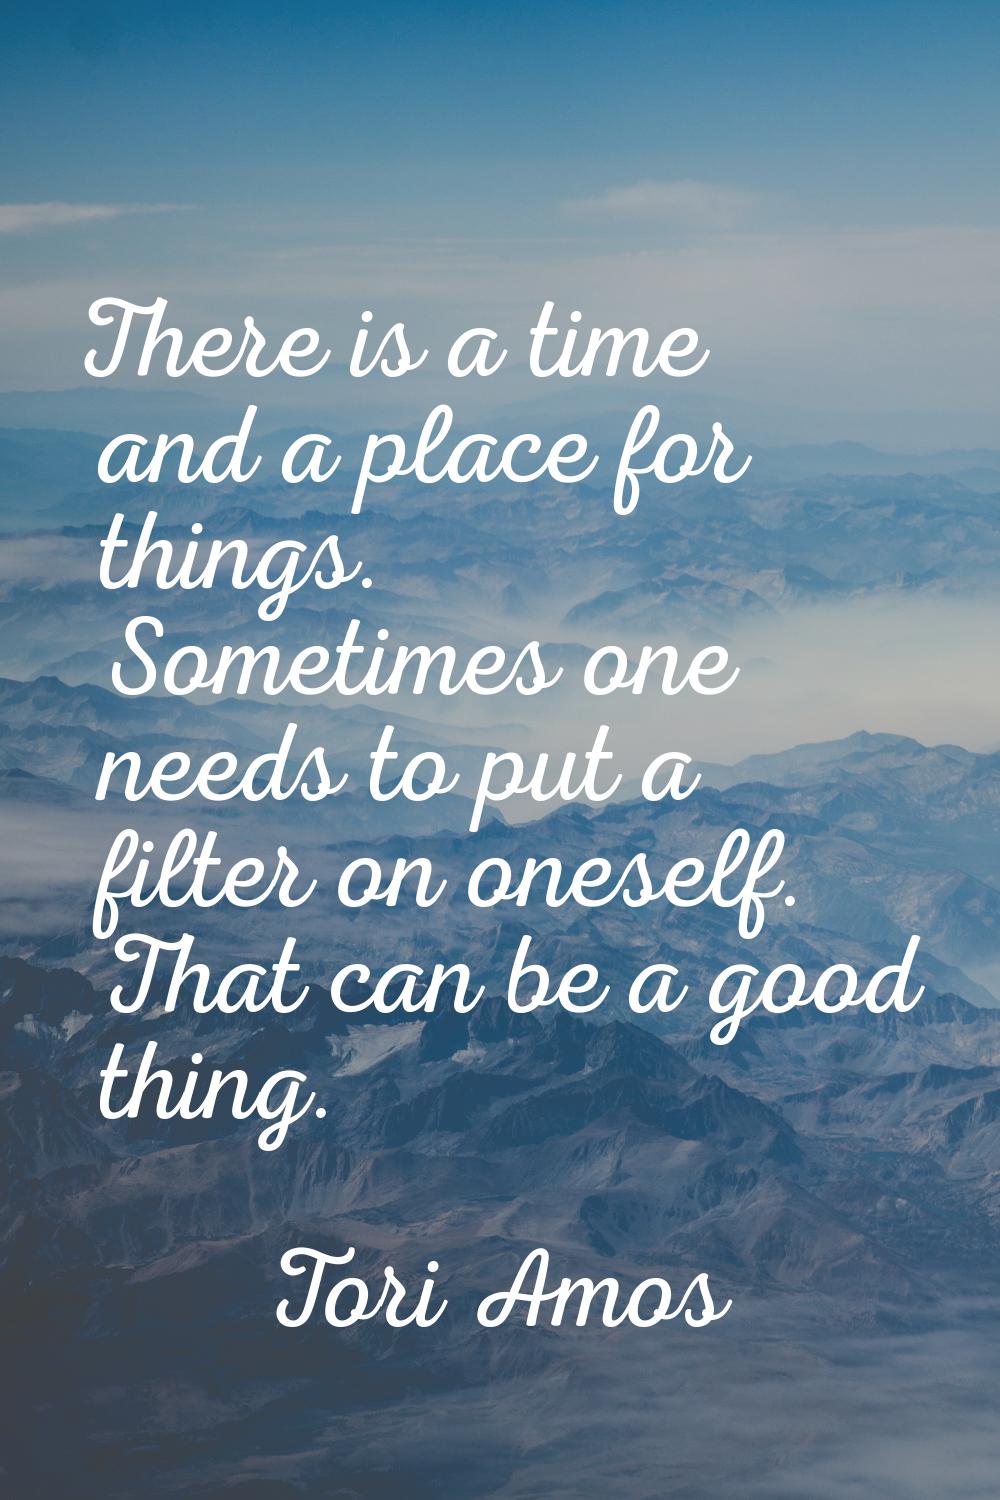 There is a time and a place for things. Sometimes one needs to put a filter on oneself. That can be